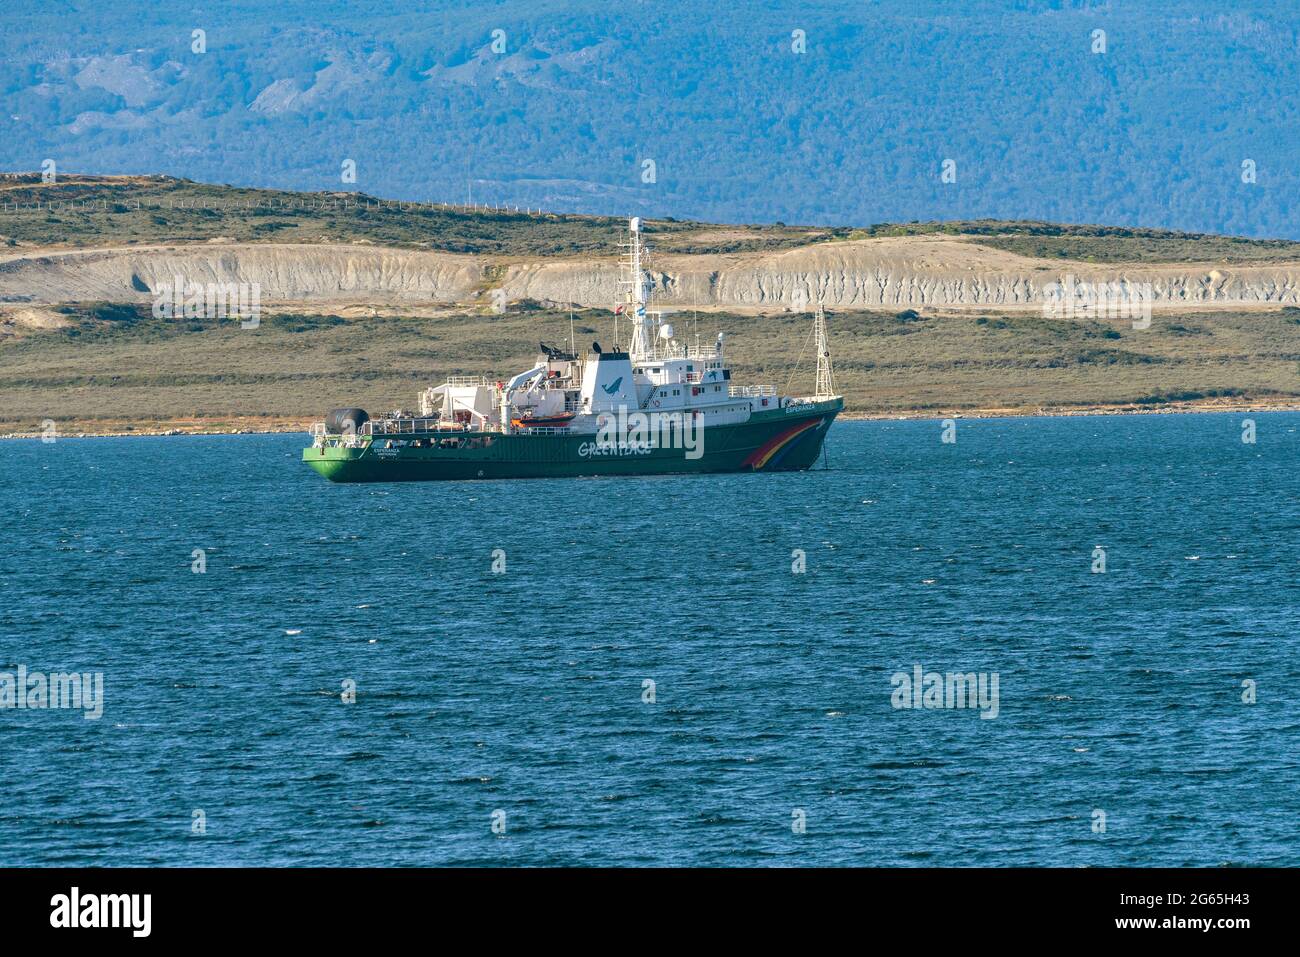 The greenpeace ship Esperanza in the Beagle Canal in front of the city Ushuaia, Patagonia, Argentina Stock Photo